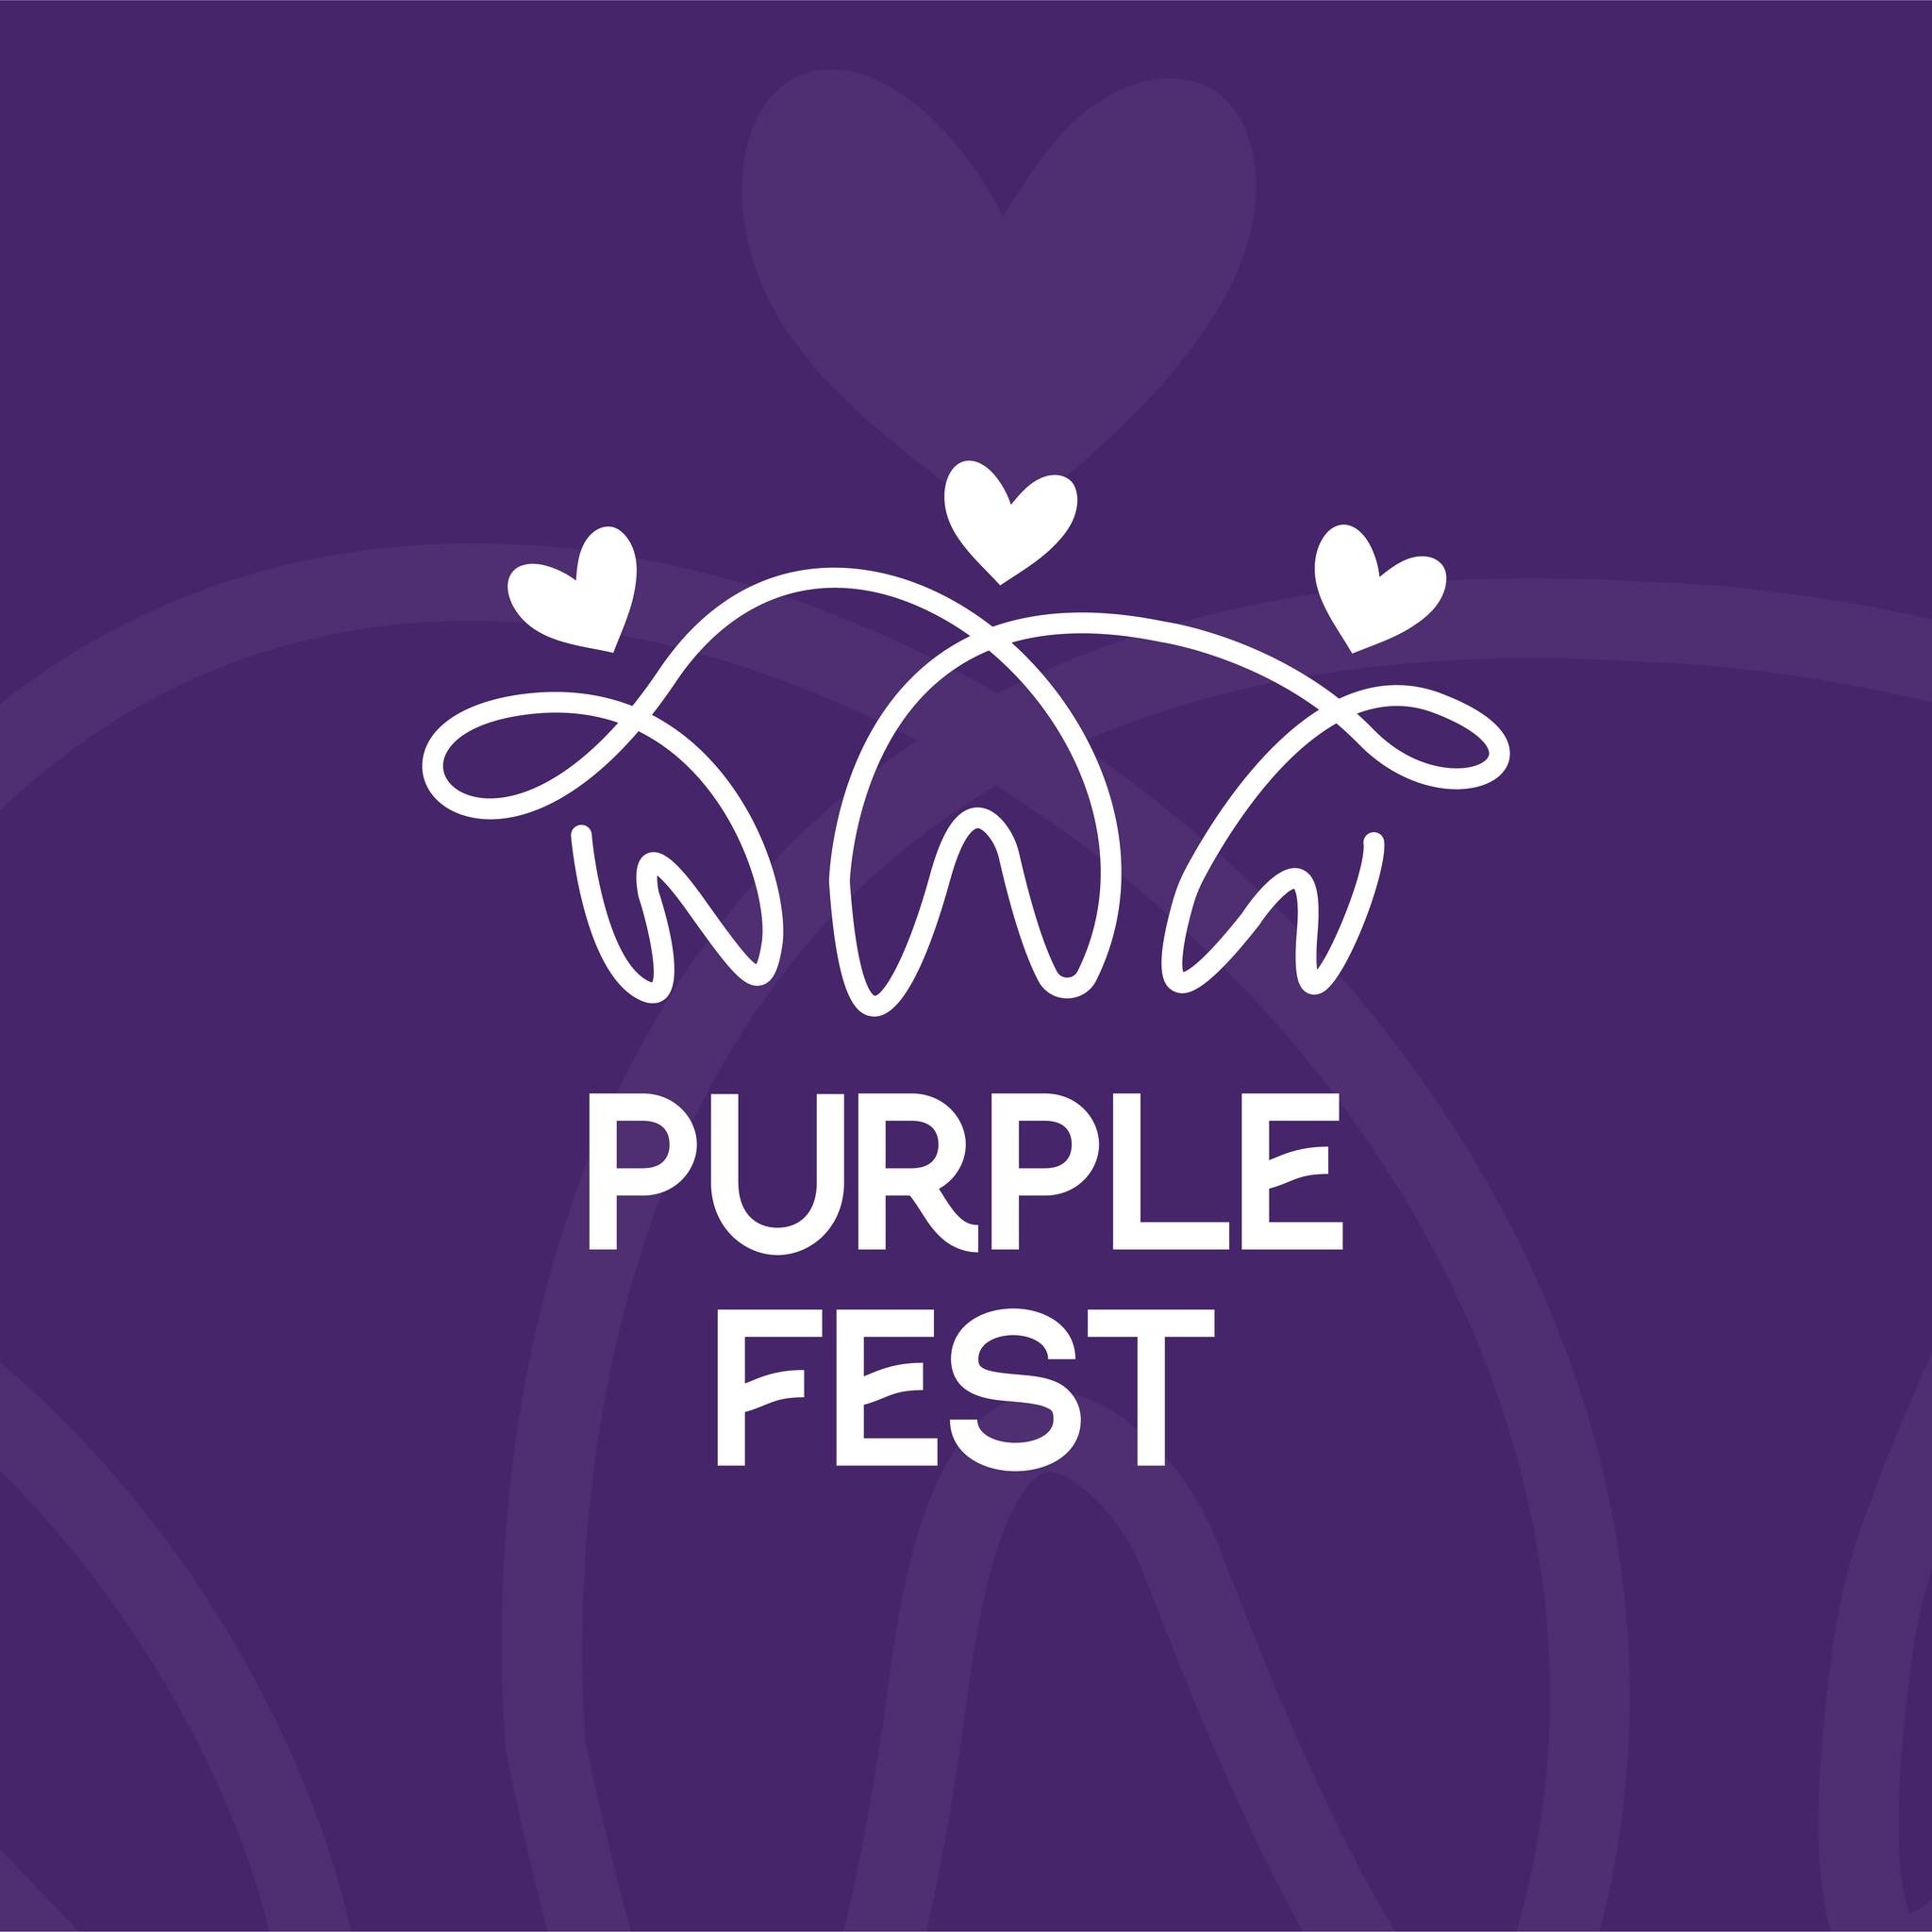 Purple Fest celebrating Diversity will be held from 6th to 8th January